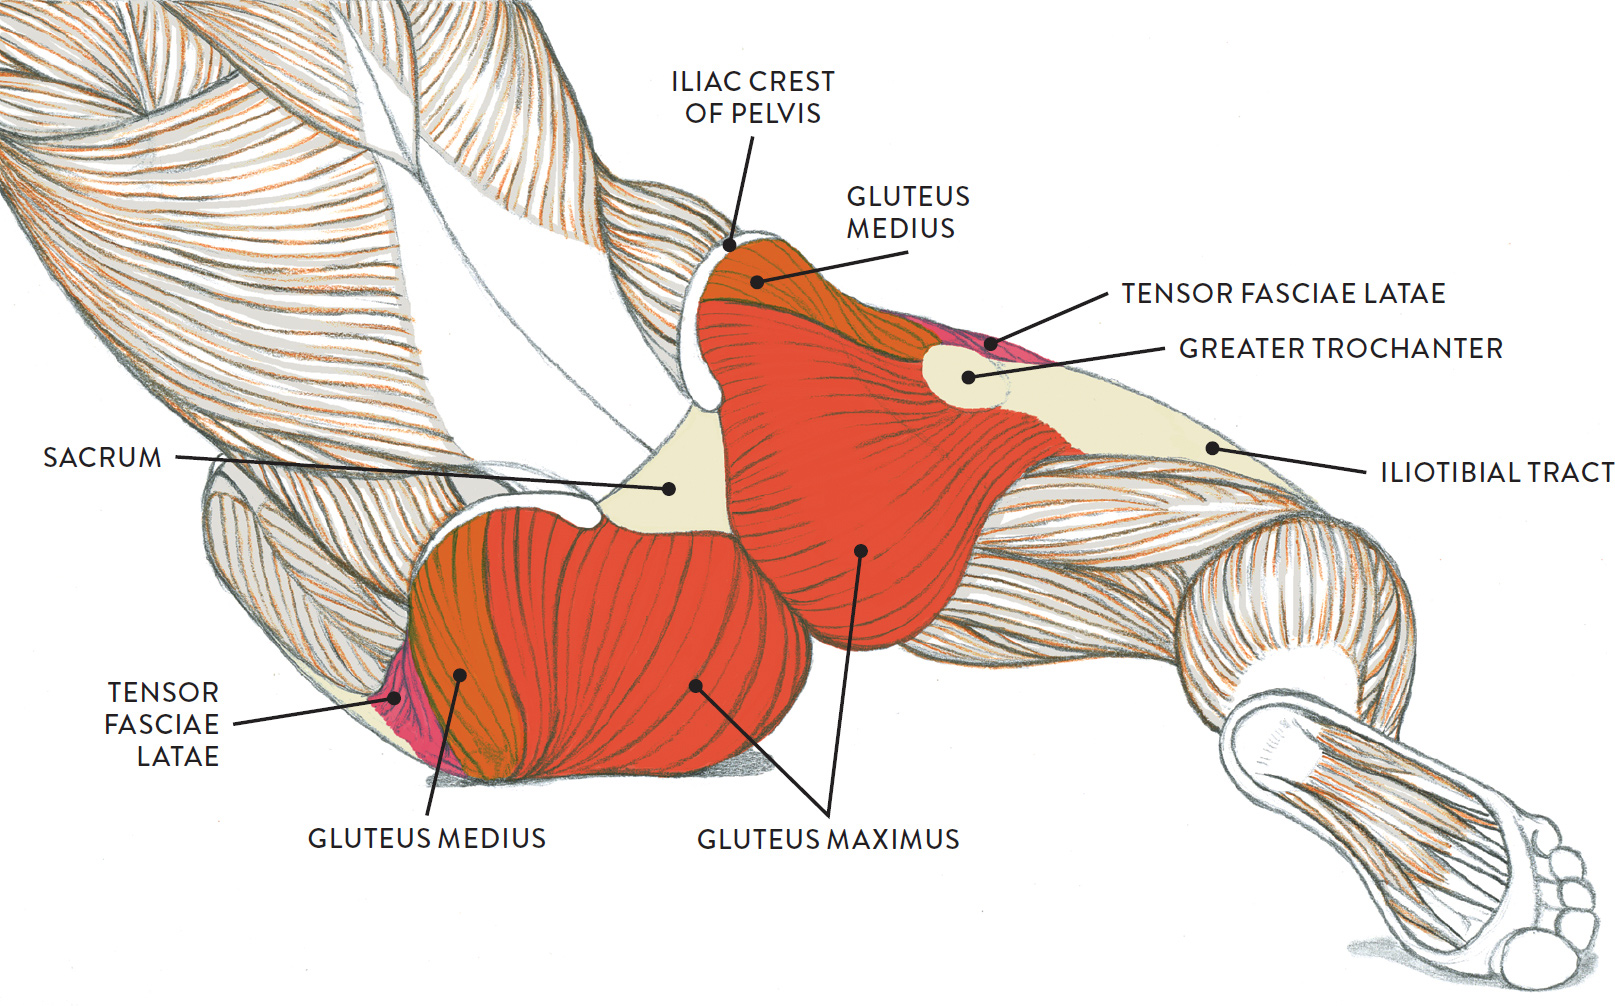 Muscles of the Leg and Foot - Classic Human Anatomy in Motion: The